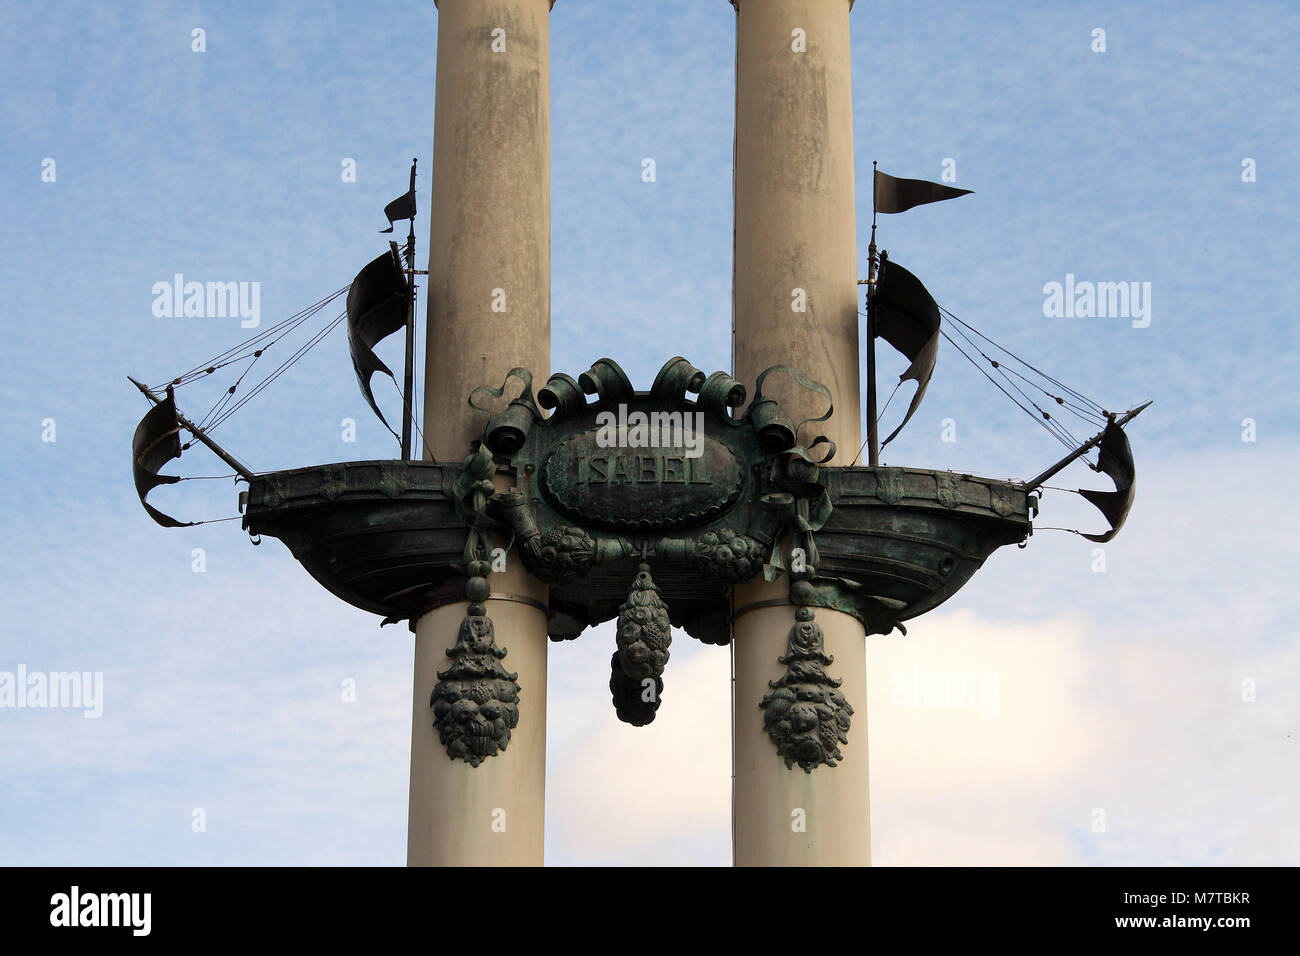 Caravel of Christopher Columbus depicted on his monument in Seville Stock Photo